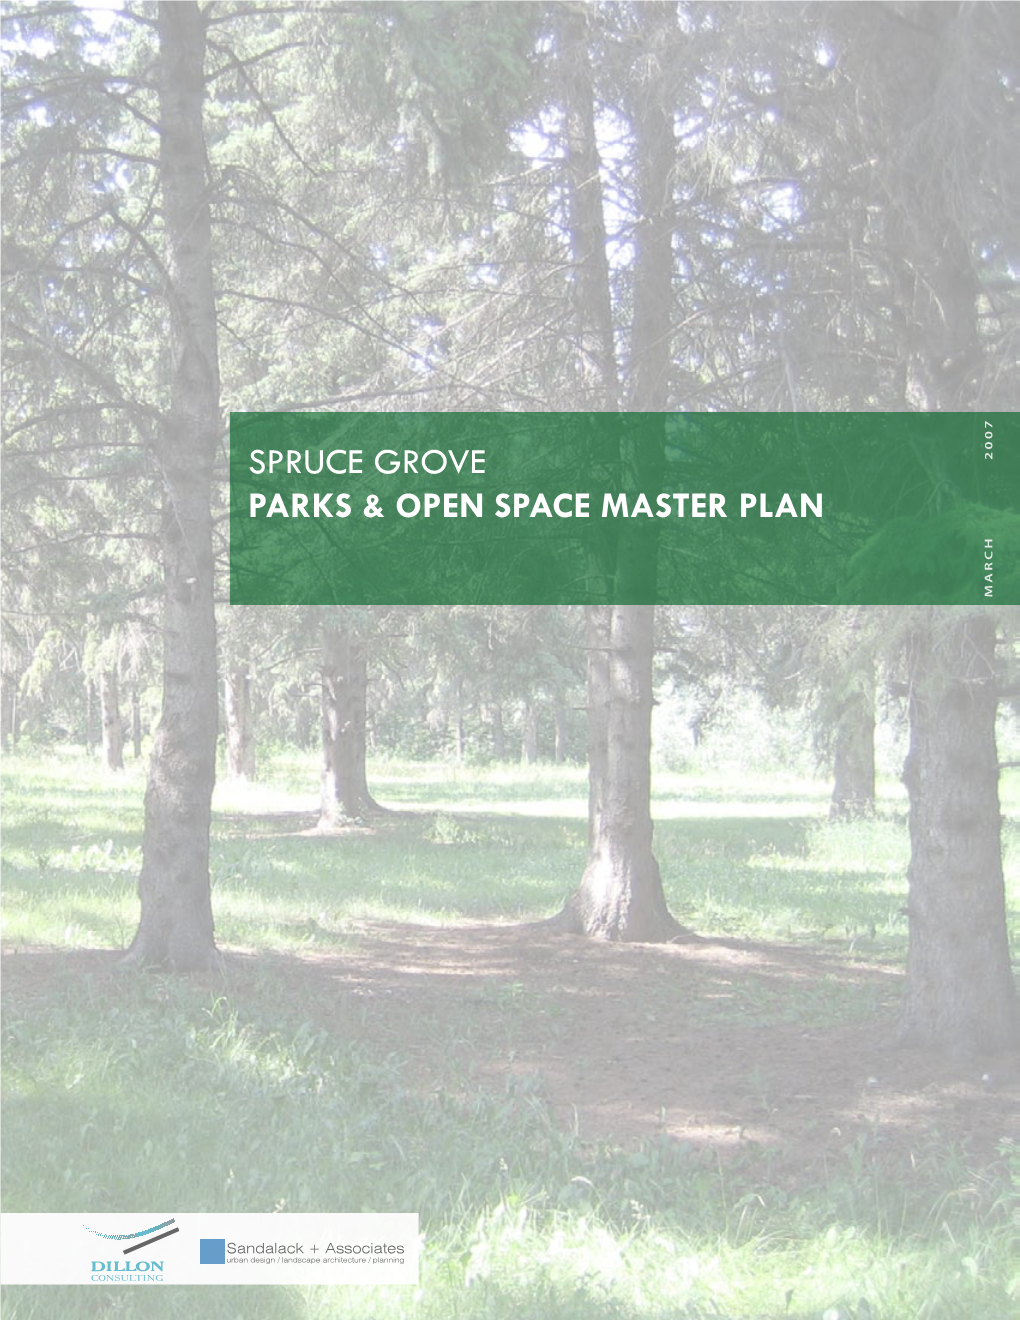 Parks and Open Space Master Plan Implementation Goals 79 6.6 Open Space Management 80 6.7 Partnerships 81 6.8 Evaluating Success 81 6.9 Updating the Plan 82